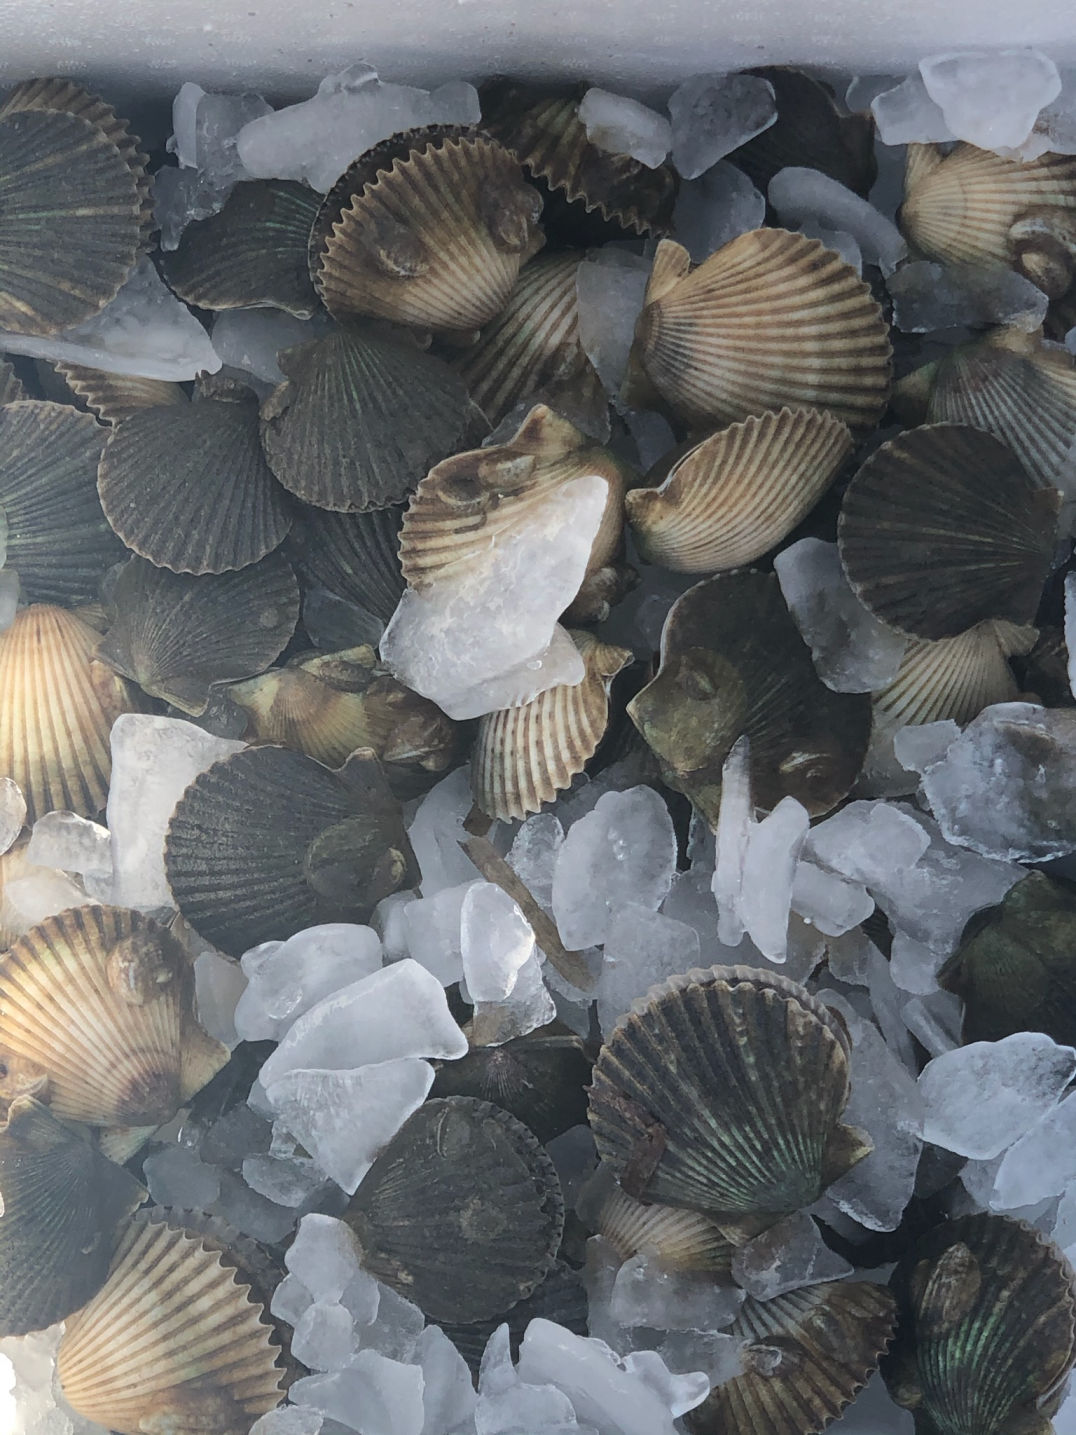 Scalloping - Over Yonder On The Cape